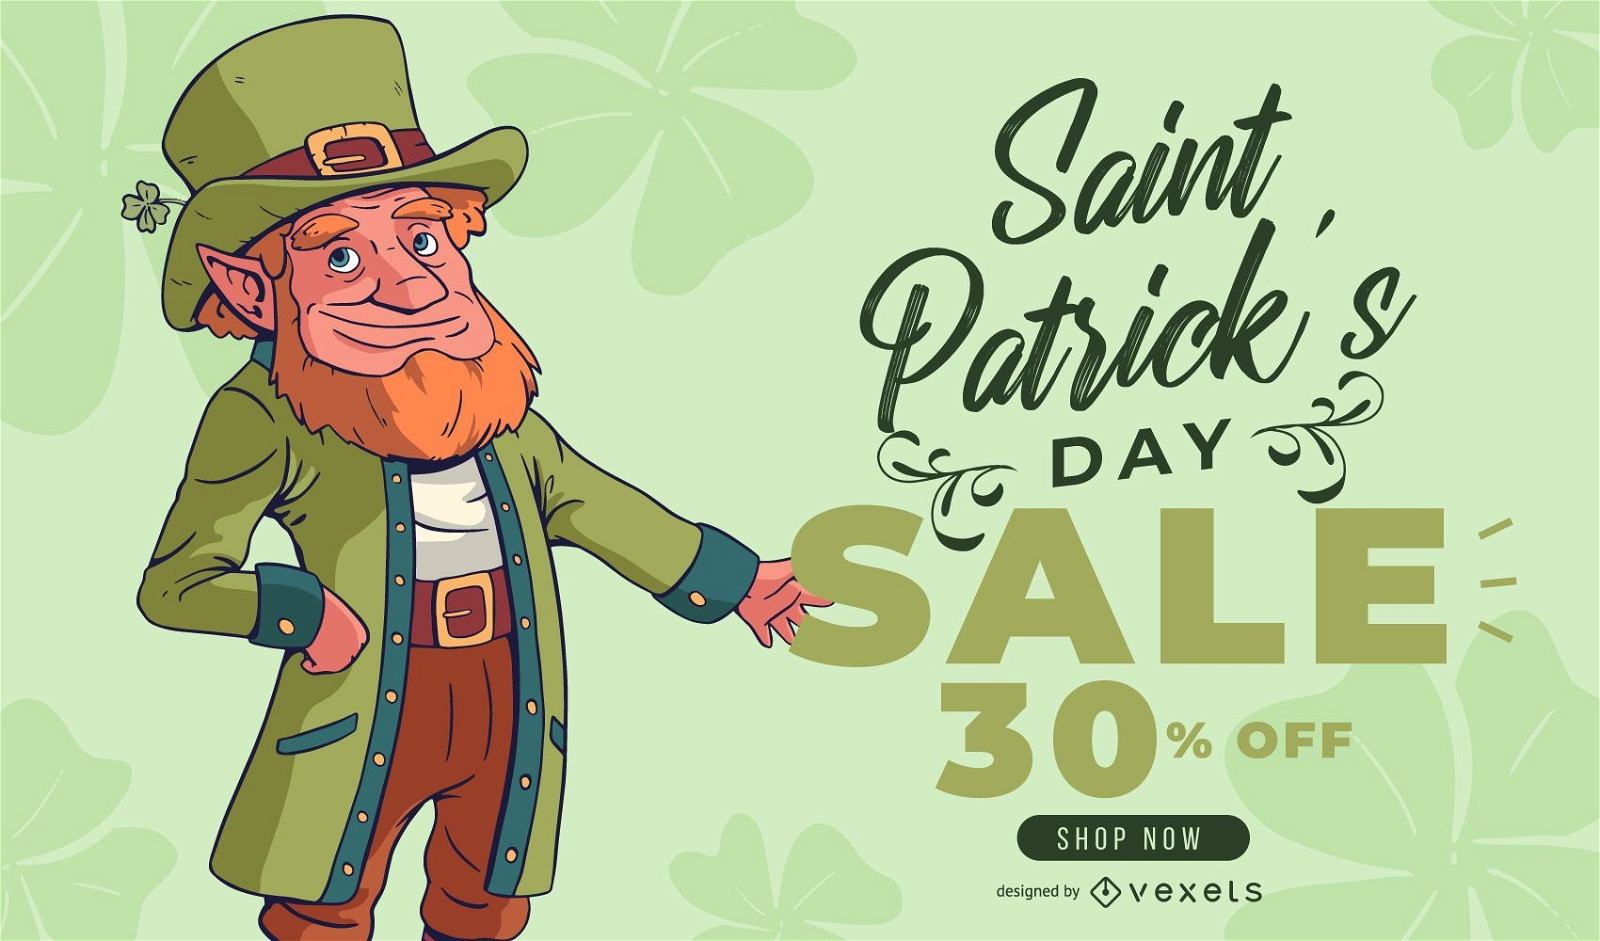 St partick's day sale banner